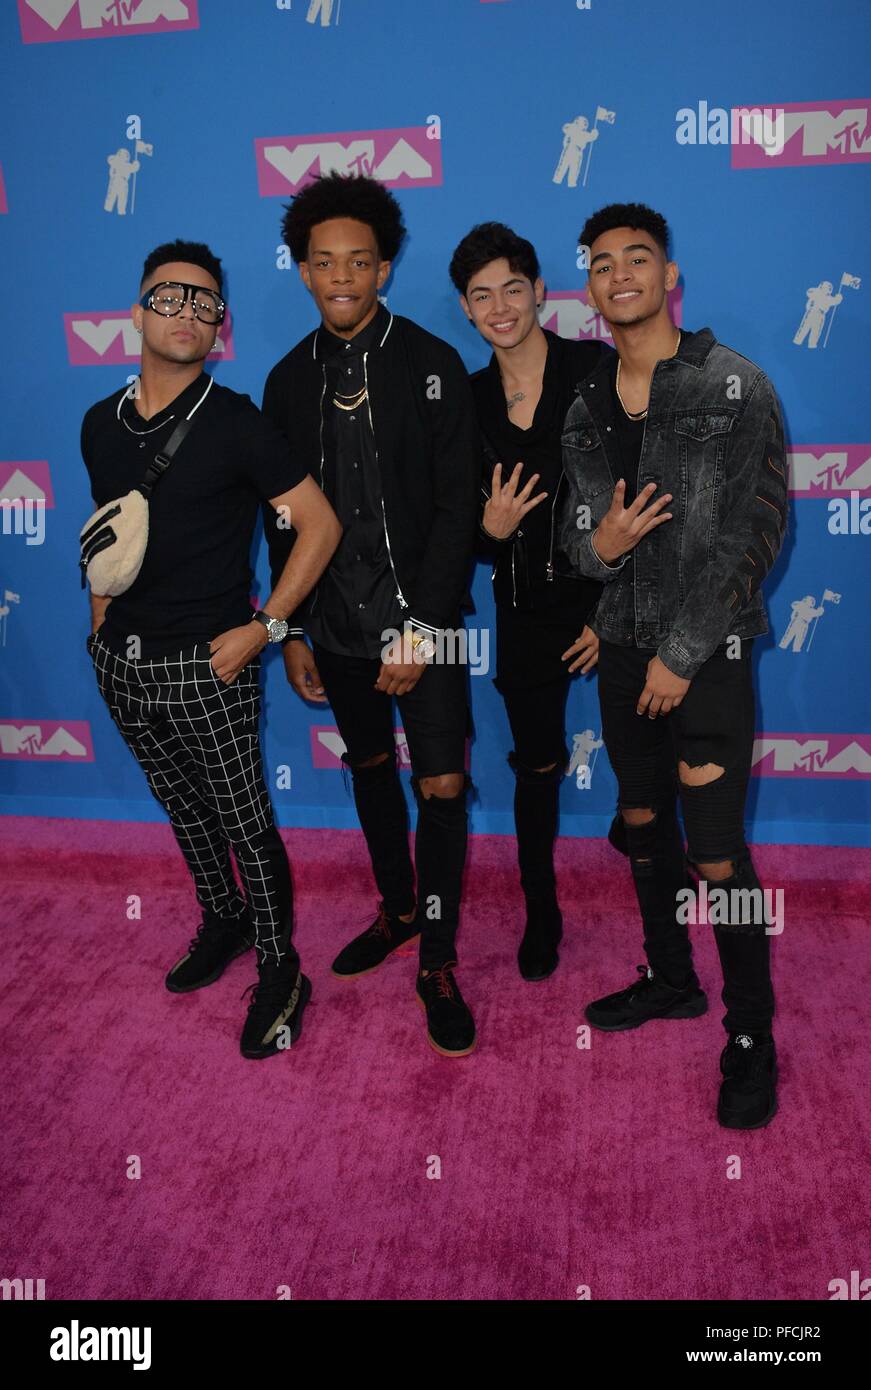 New York, NY, USA. 20th Aug, 2018. at arrivals for 2018 MTV VMAs - Arrivals Part 5, Radio City Music Hall, New York, NY August 20, 2018. Credit: Kristin Callahan/Everett Collection/Alamy Live News Stock Photo